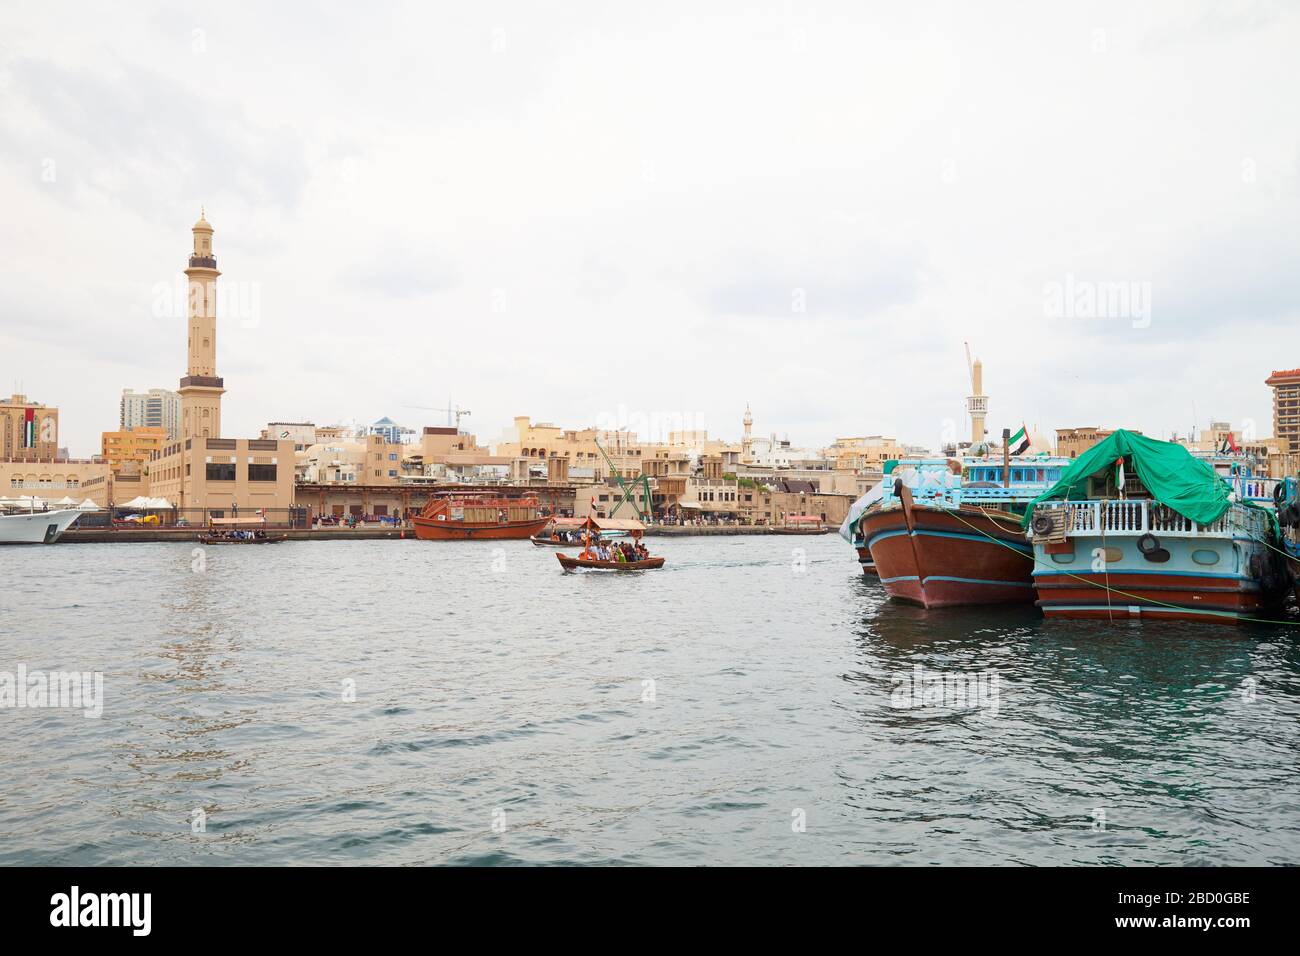 DUBAI, UNITED ARAB EMIRATES - NOVEMBER 21, 2019: Dubai creek with abra and dhow traditional boats in a cloudy day Stock Photo